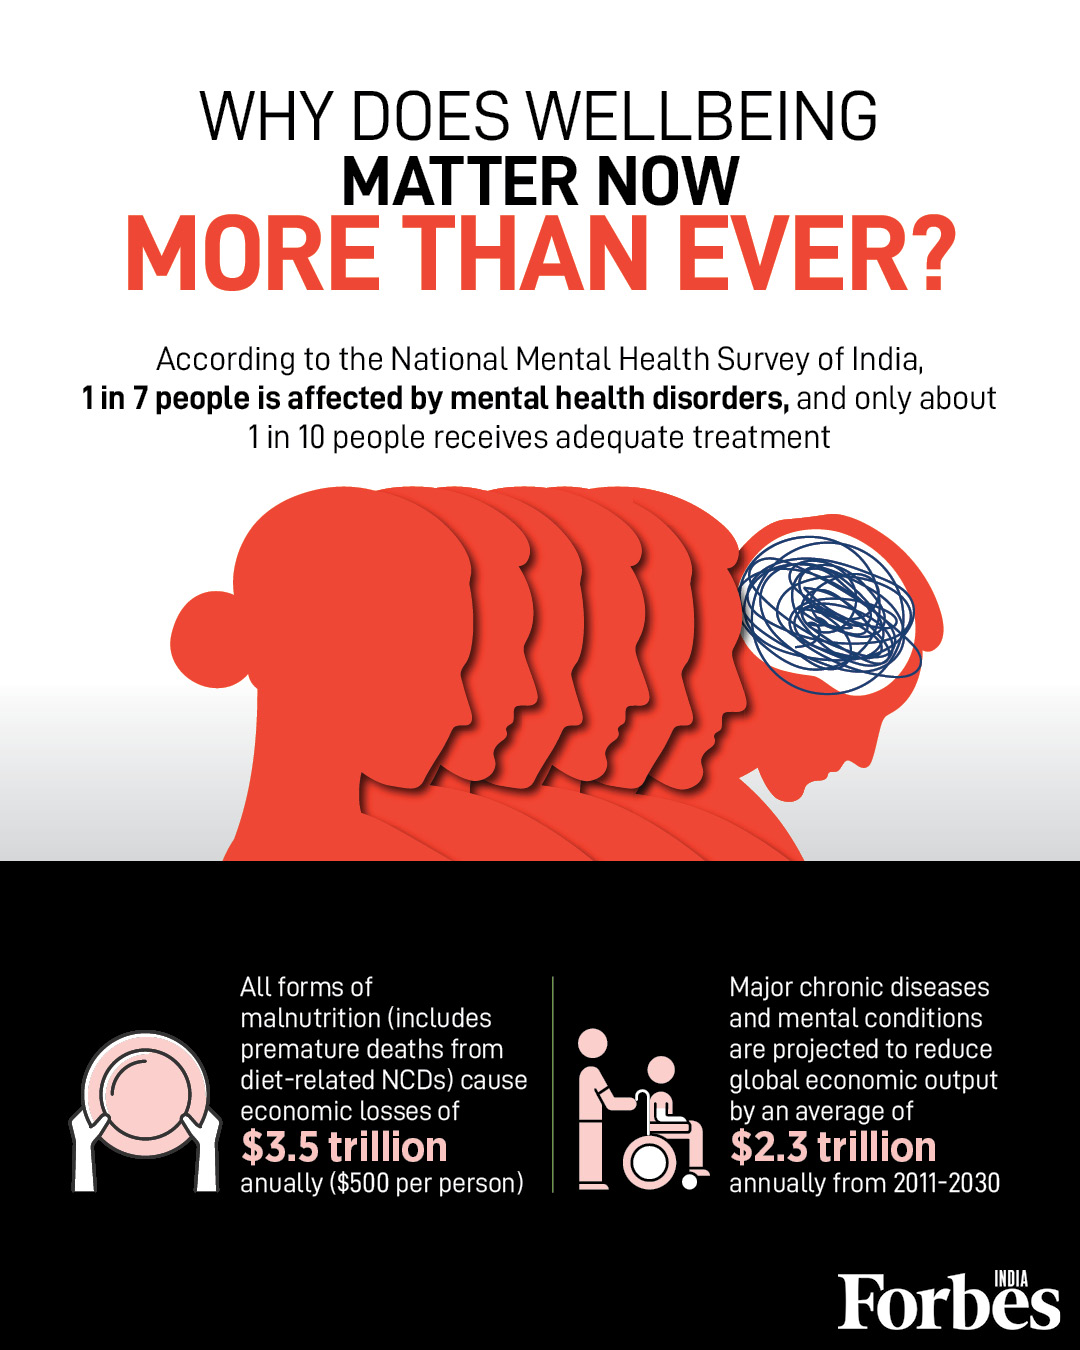 Only one in ten people in India receive adequate treatment for mental health disorders